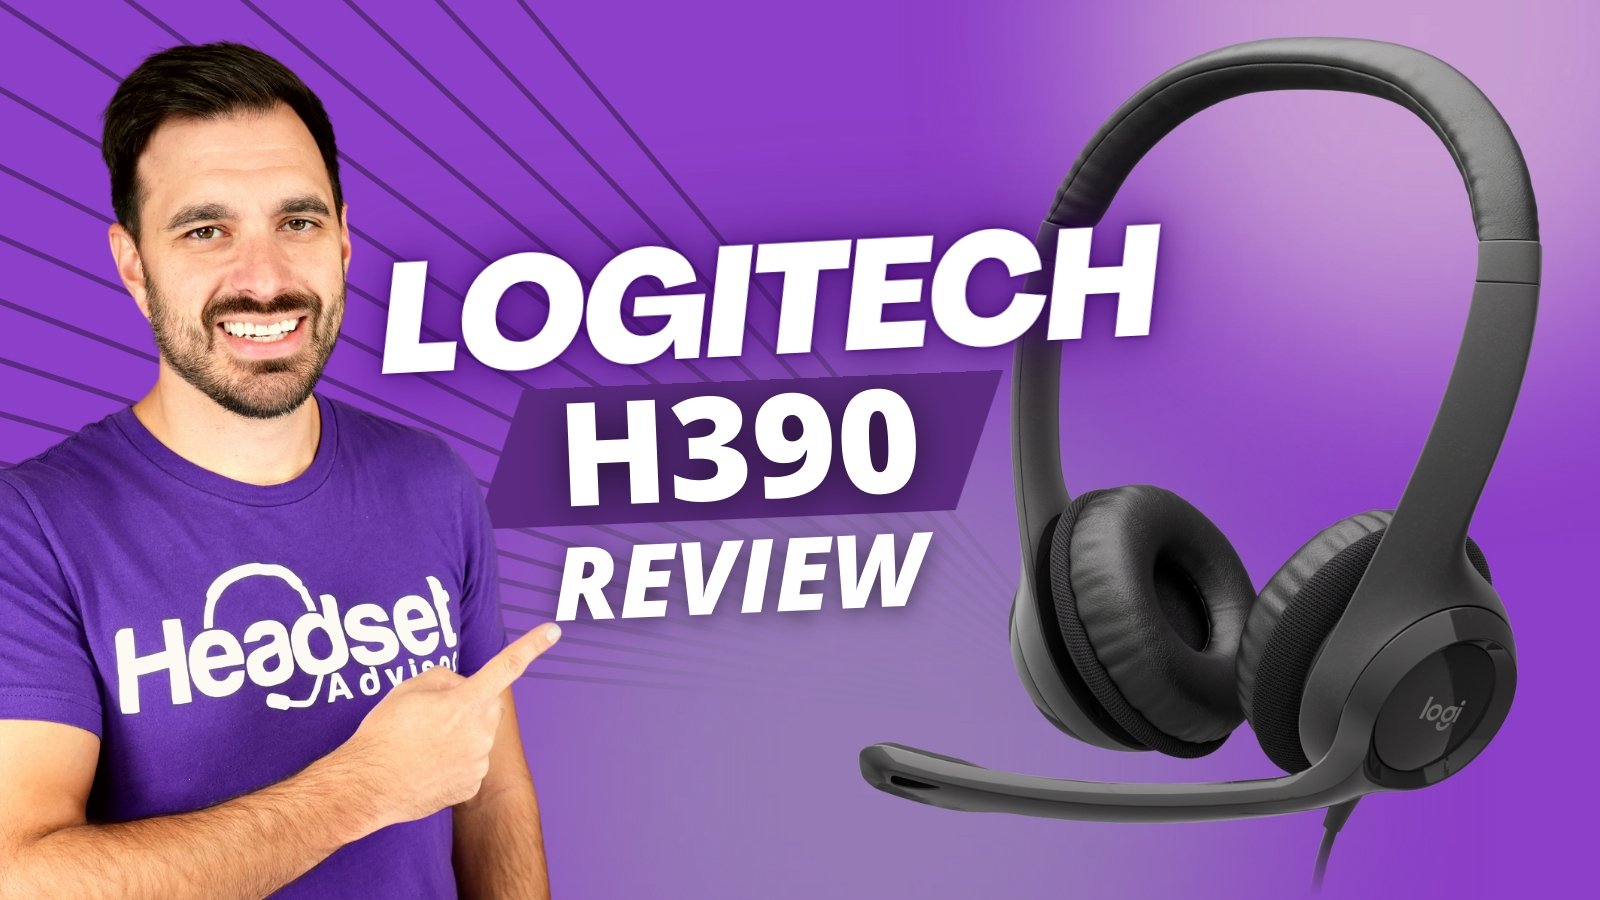 Logitech H390 Review: Uncovering the Comfort, Quality, and Features of this Affordable Headset - Headset Advisor